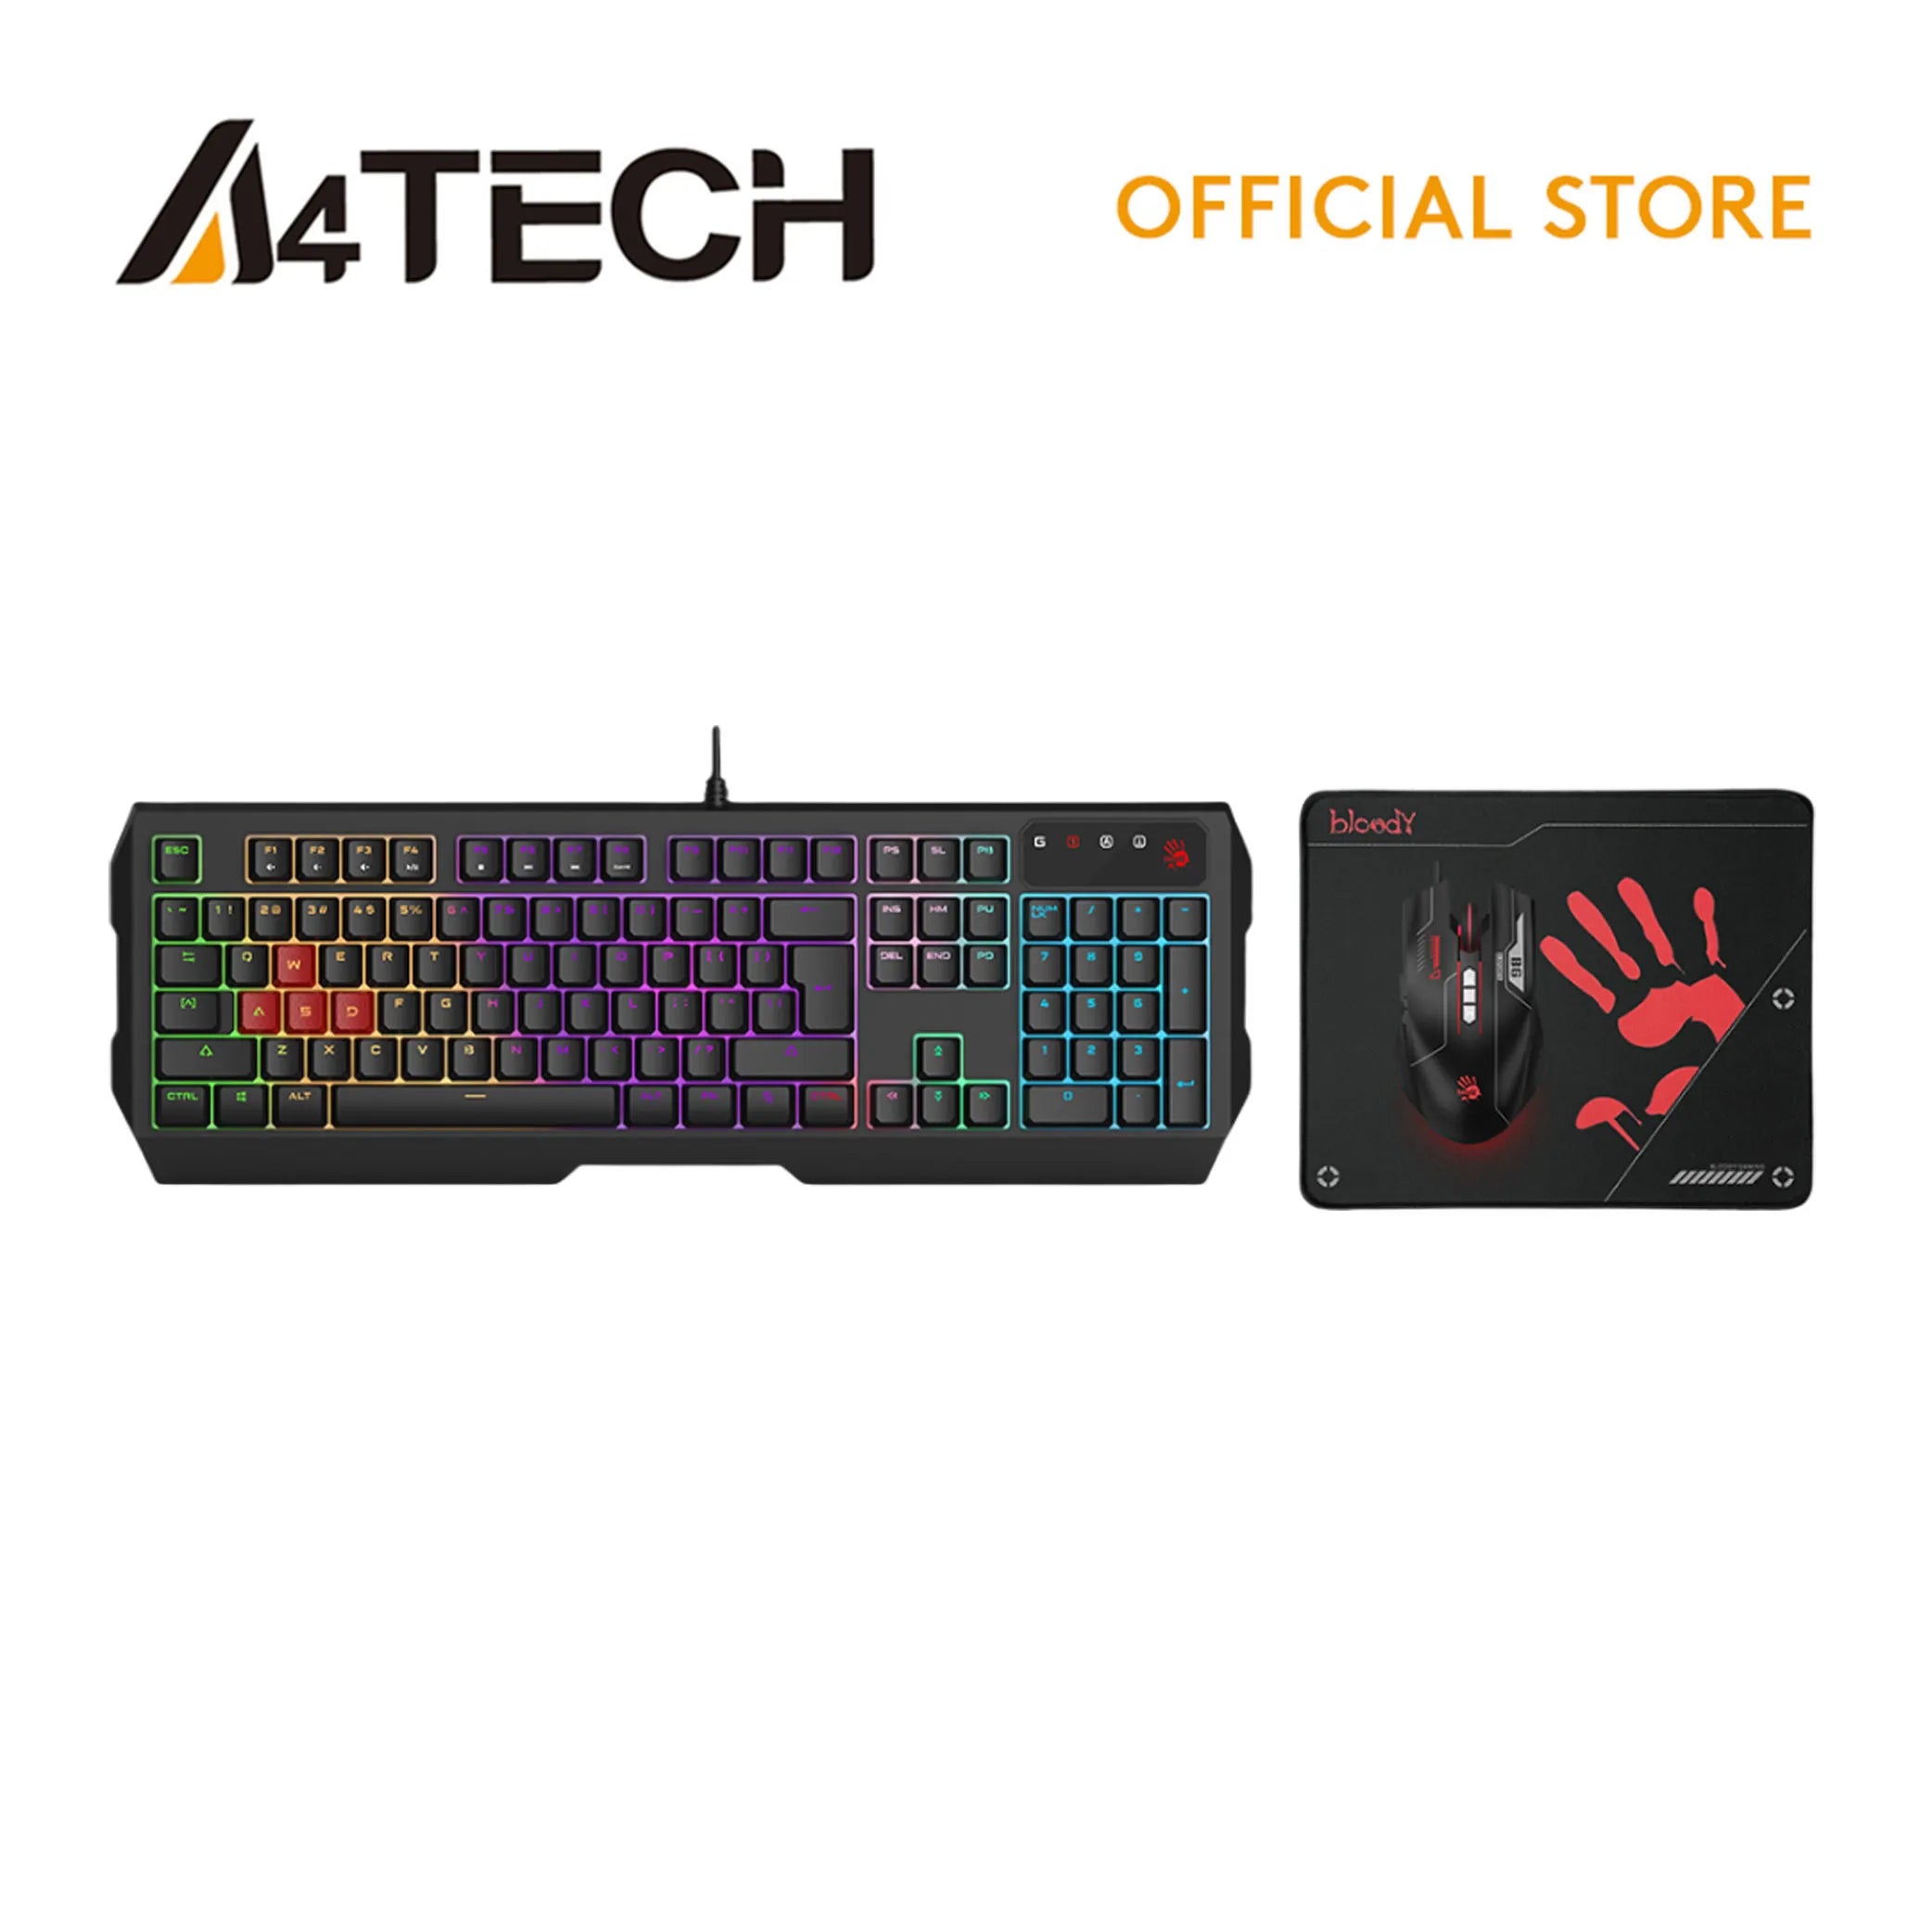 A4Tech B1700 Bloody USB Gaming Keyboard, Pad And Mouse Combo